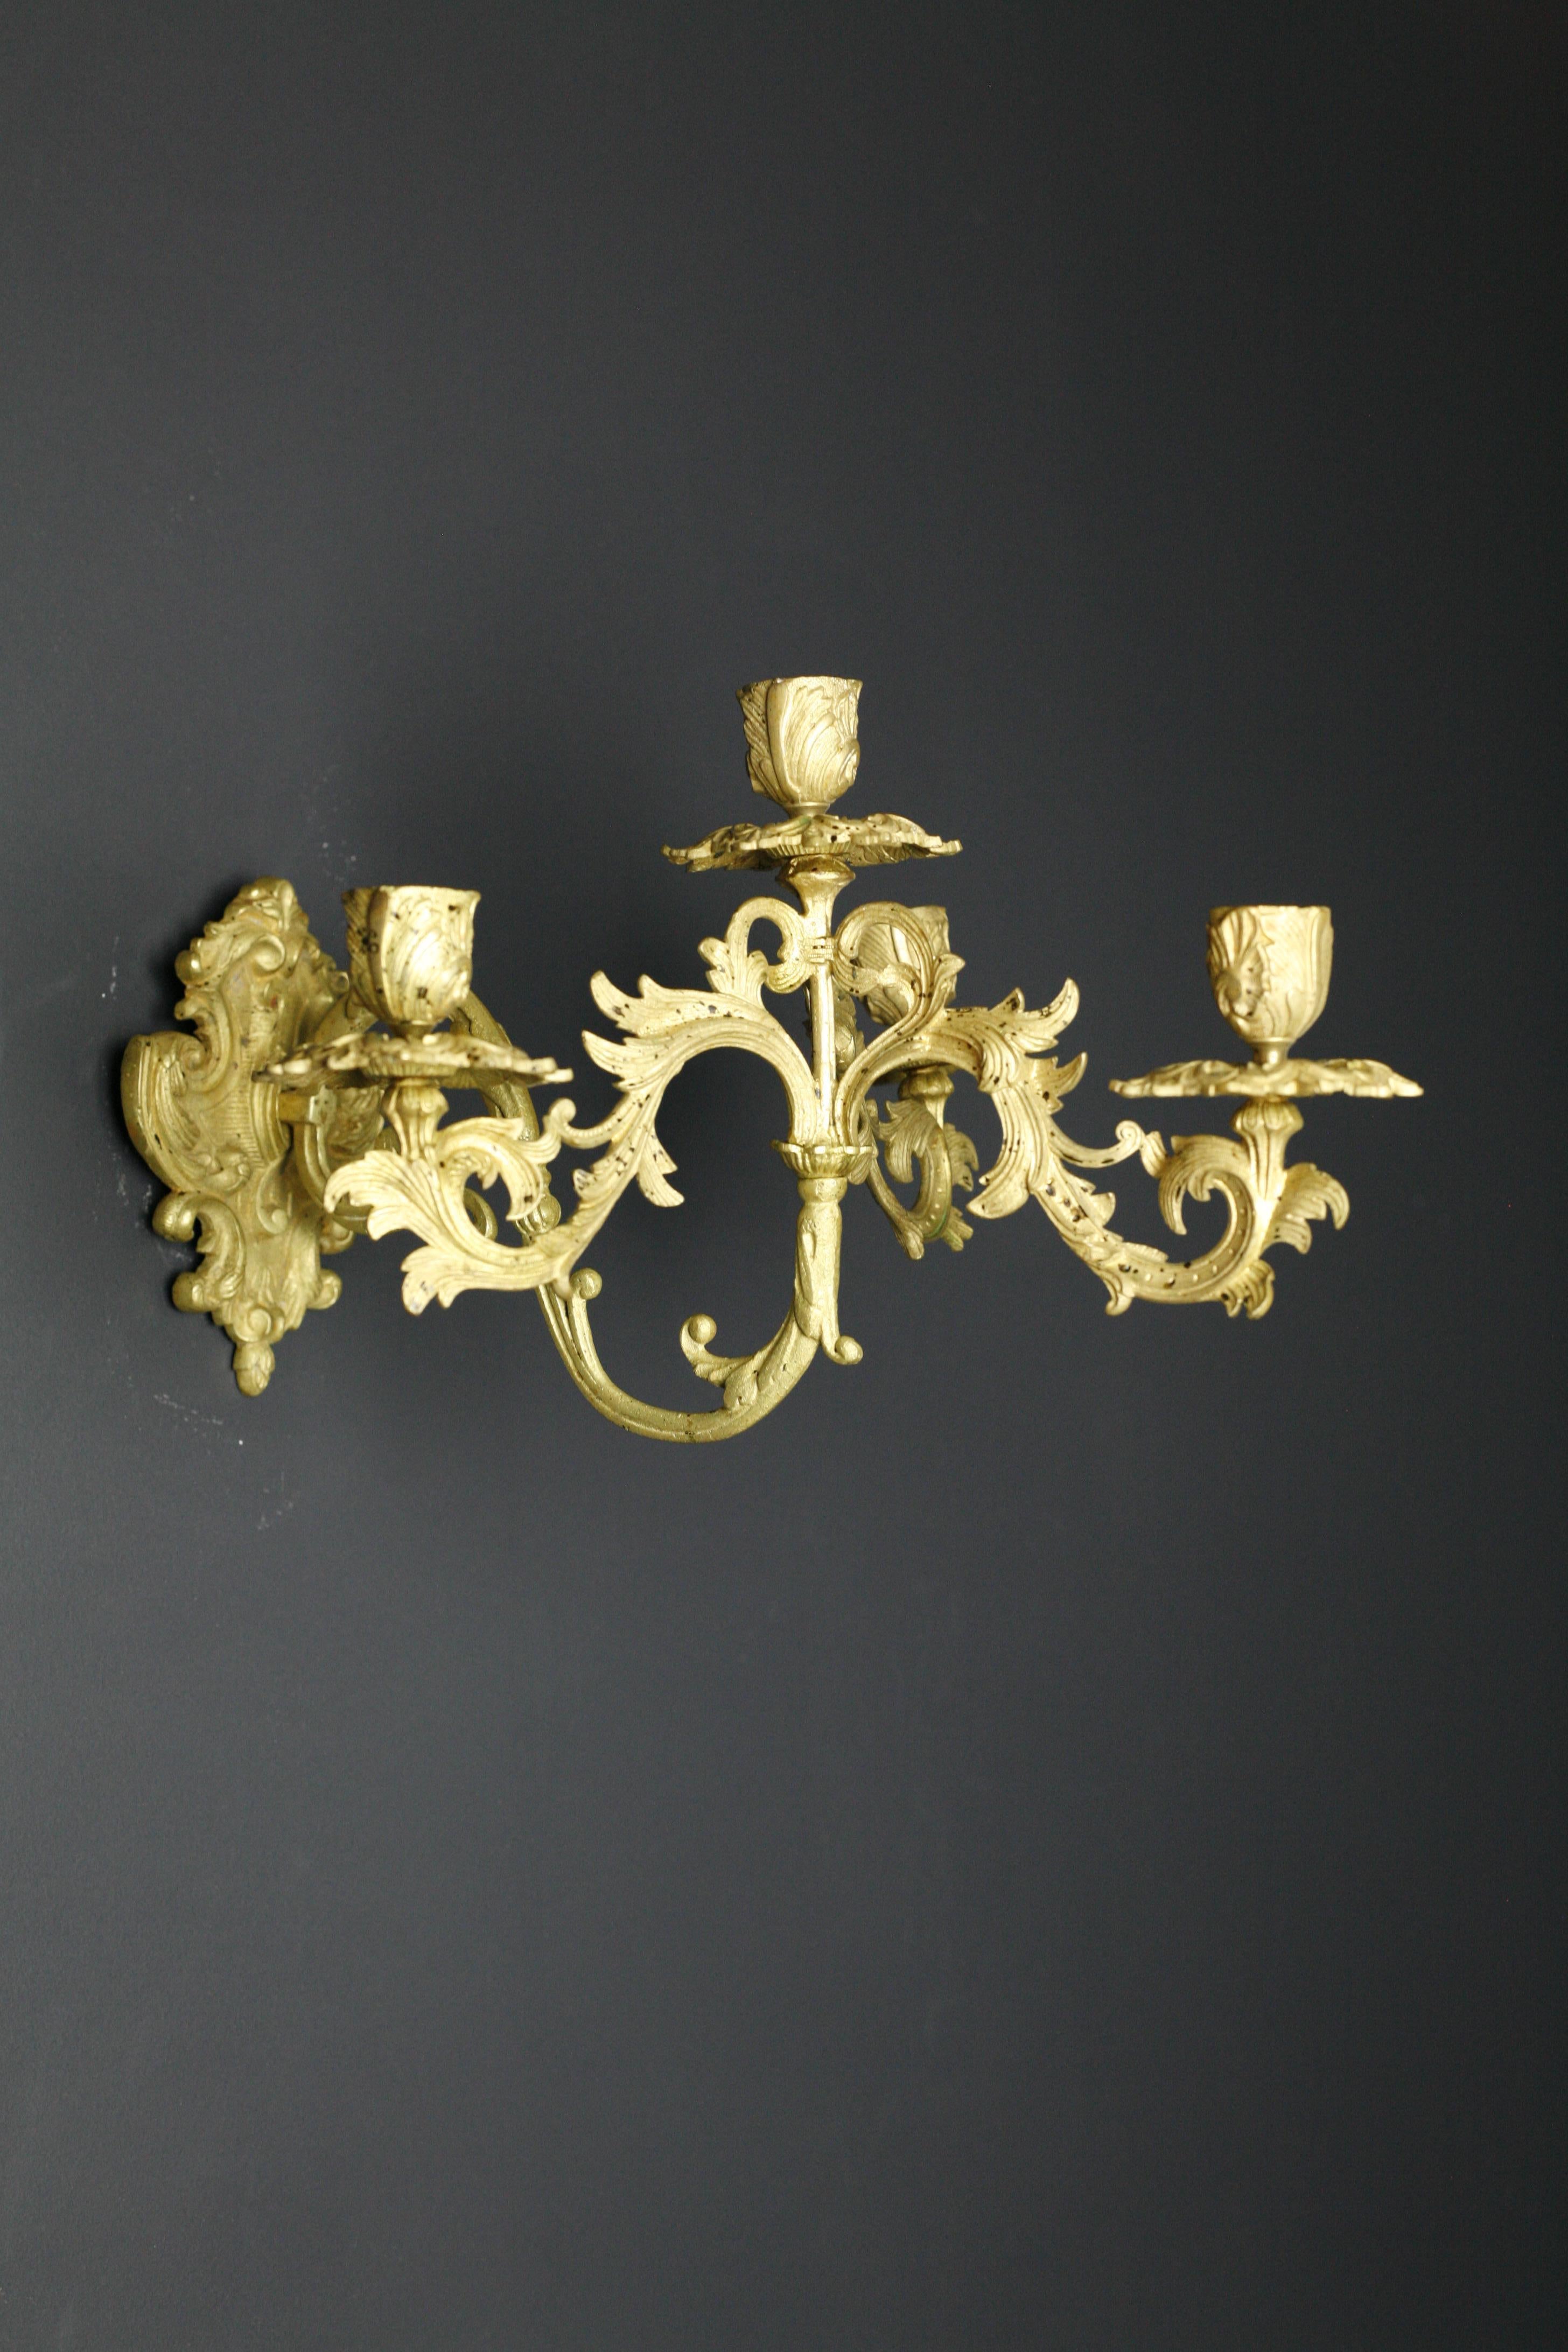 Cast Pair of French Brass Candle Light Sconces, France Louis XVI Style, 19th Century For Sale